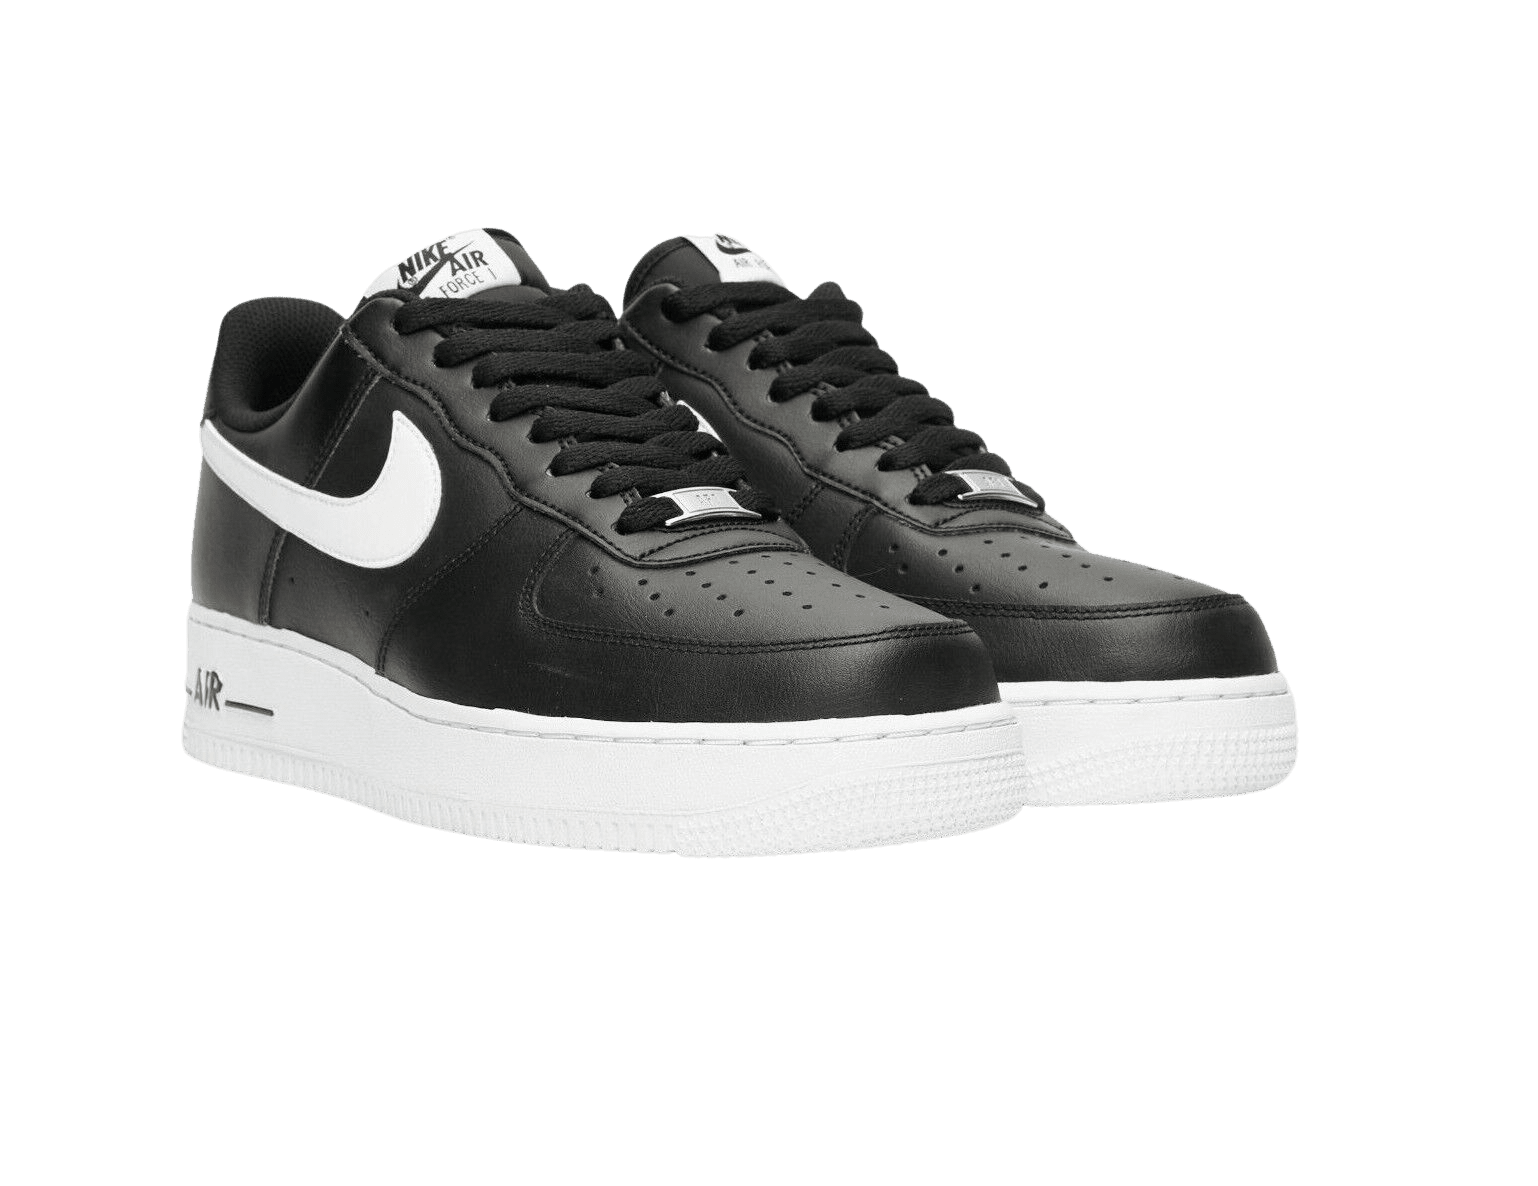 Black and White Air Force 1 | eBay